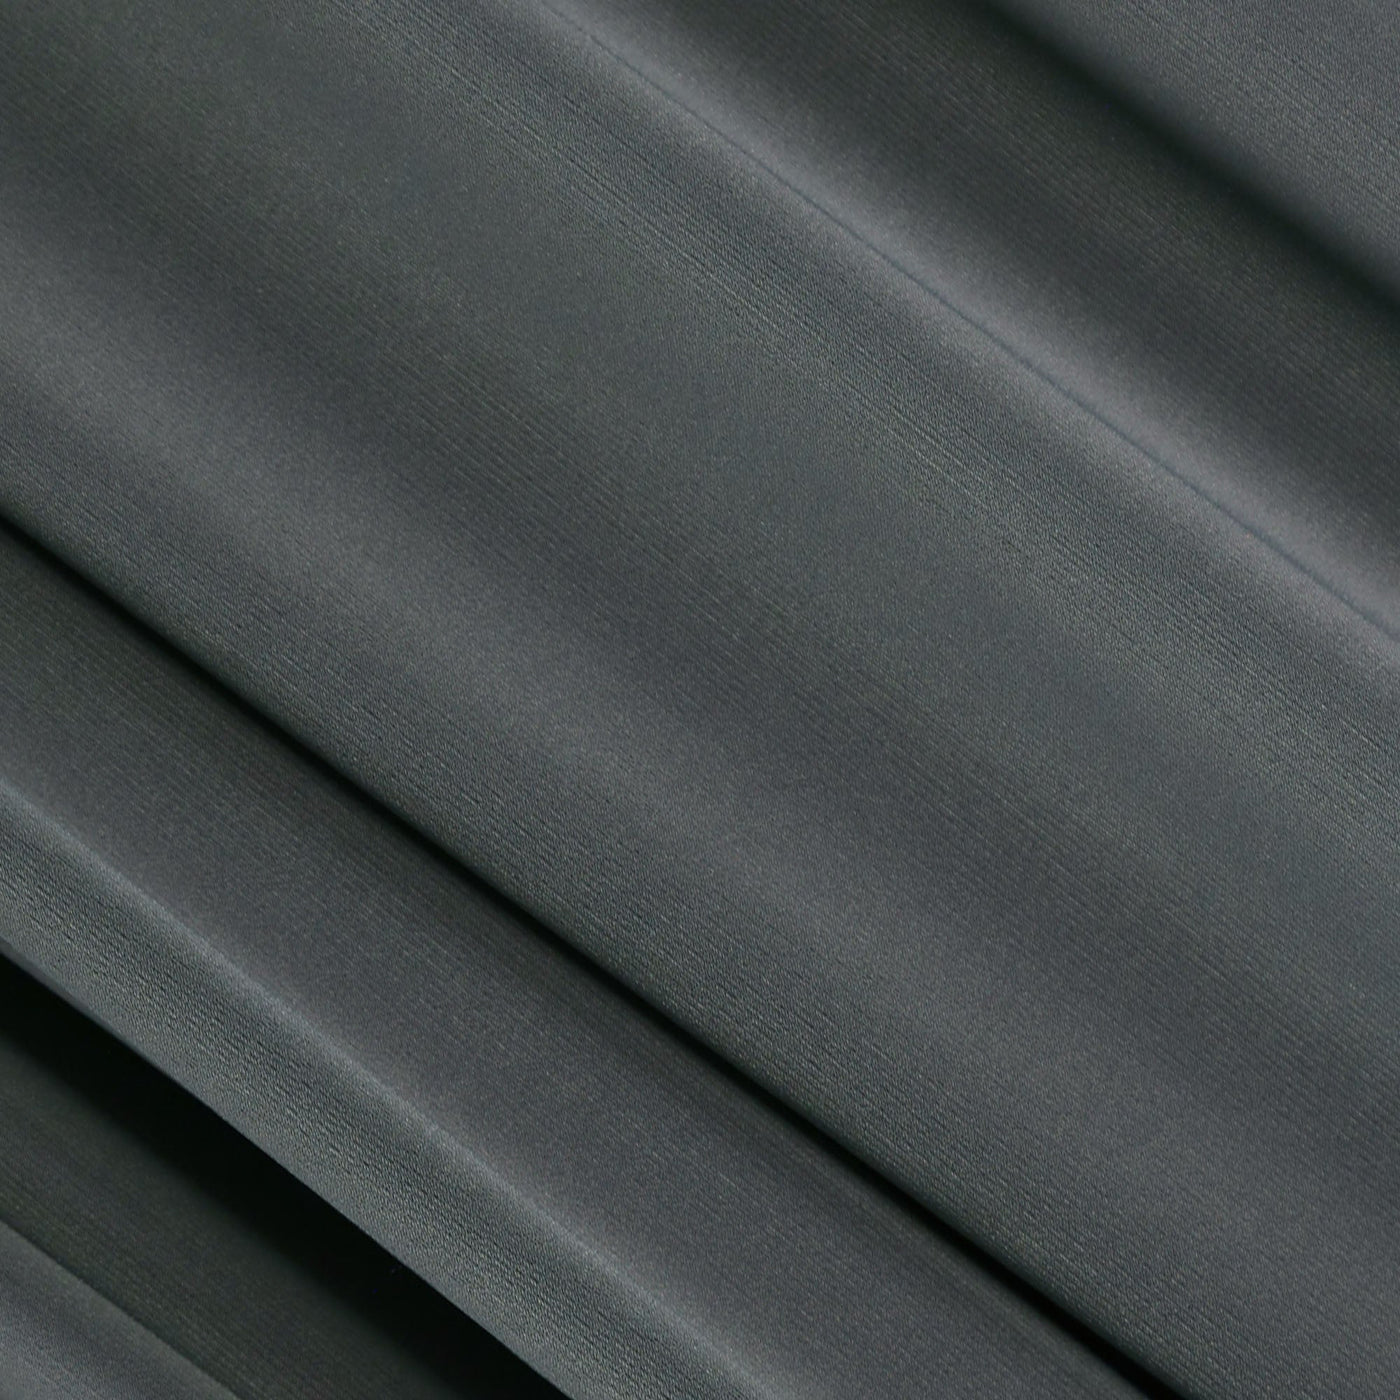 ITY Polyester Spandex Fabric | Charcoal - FabricLA.com